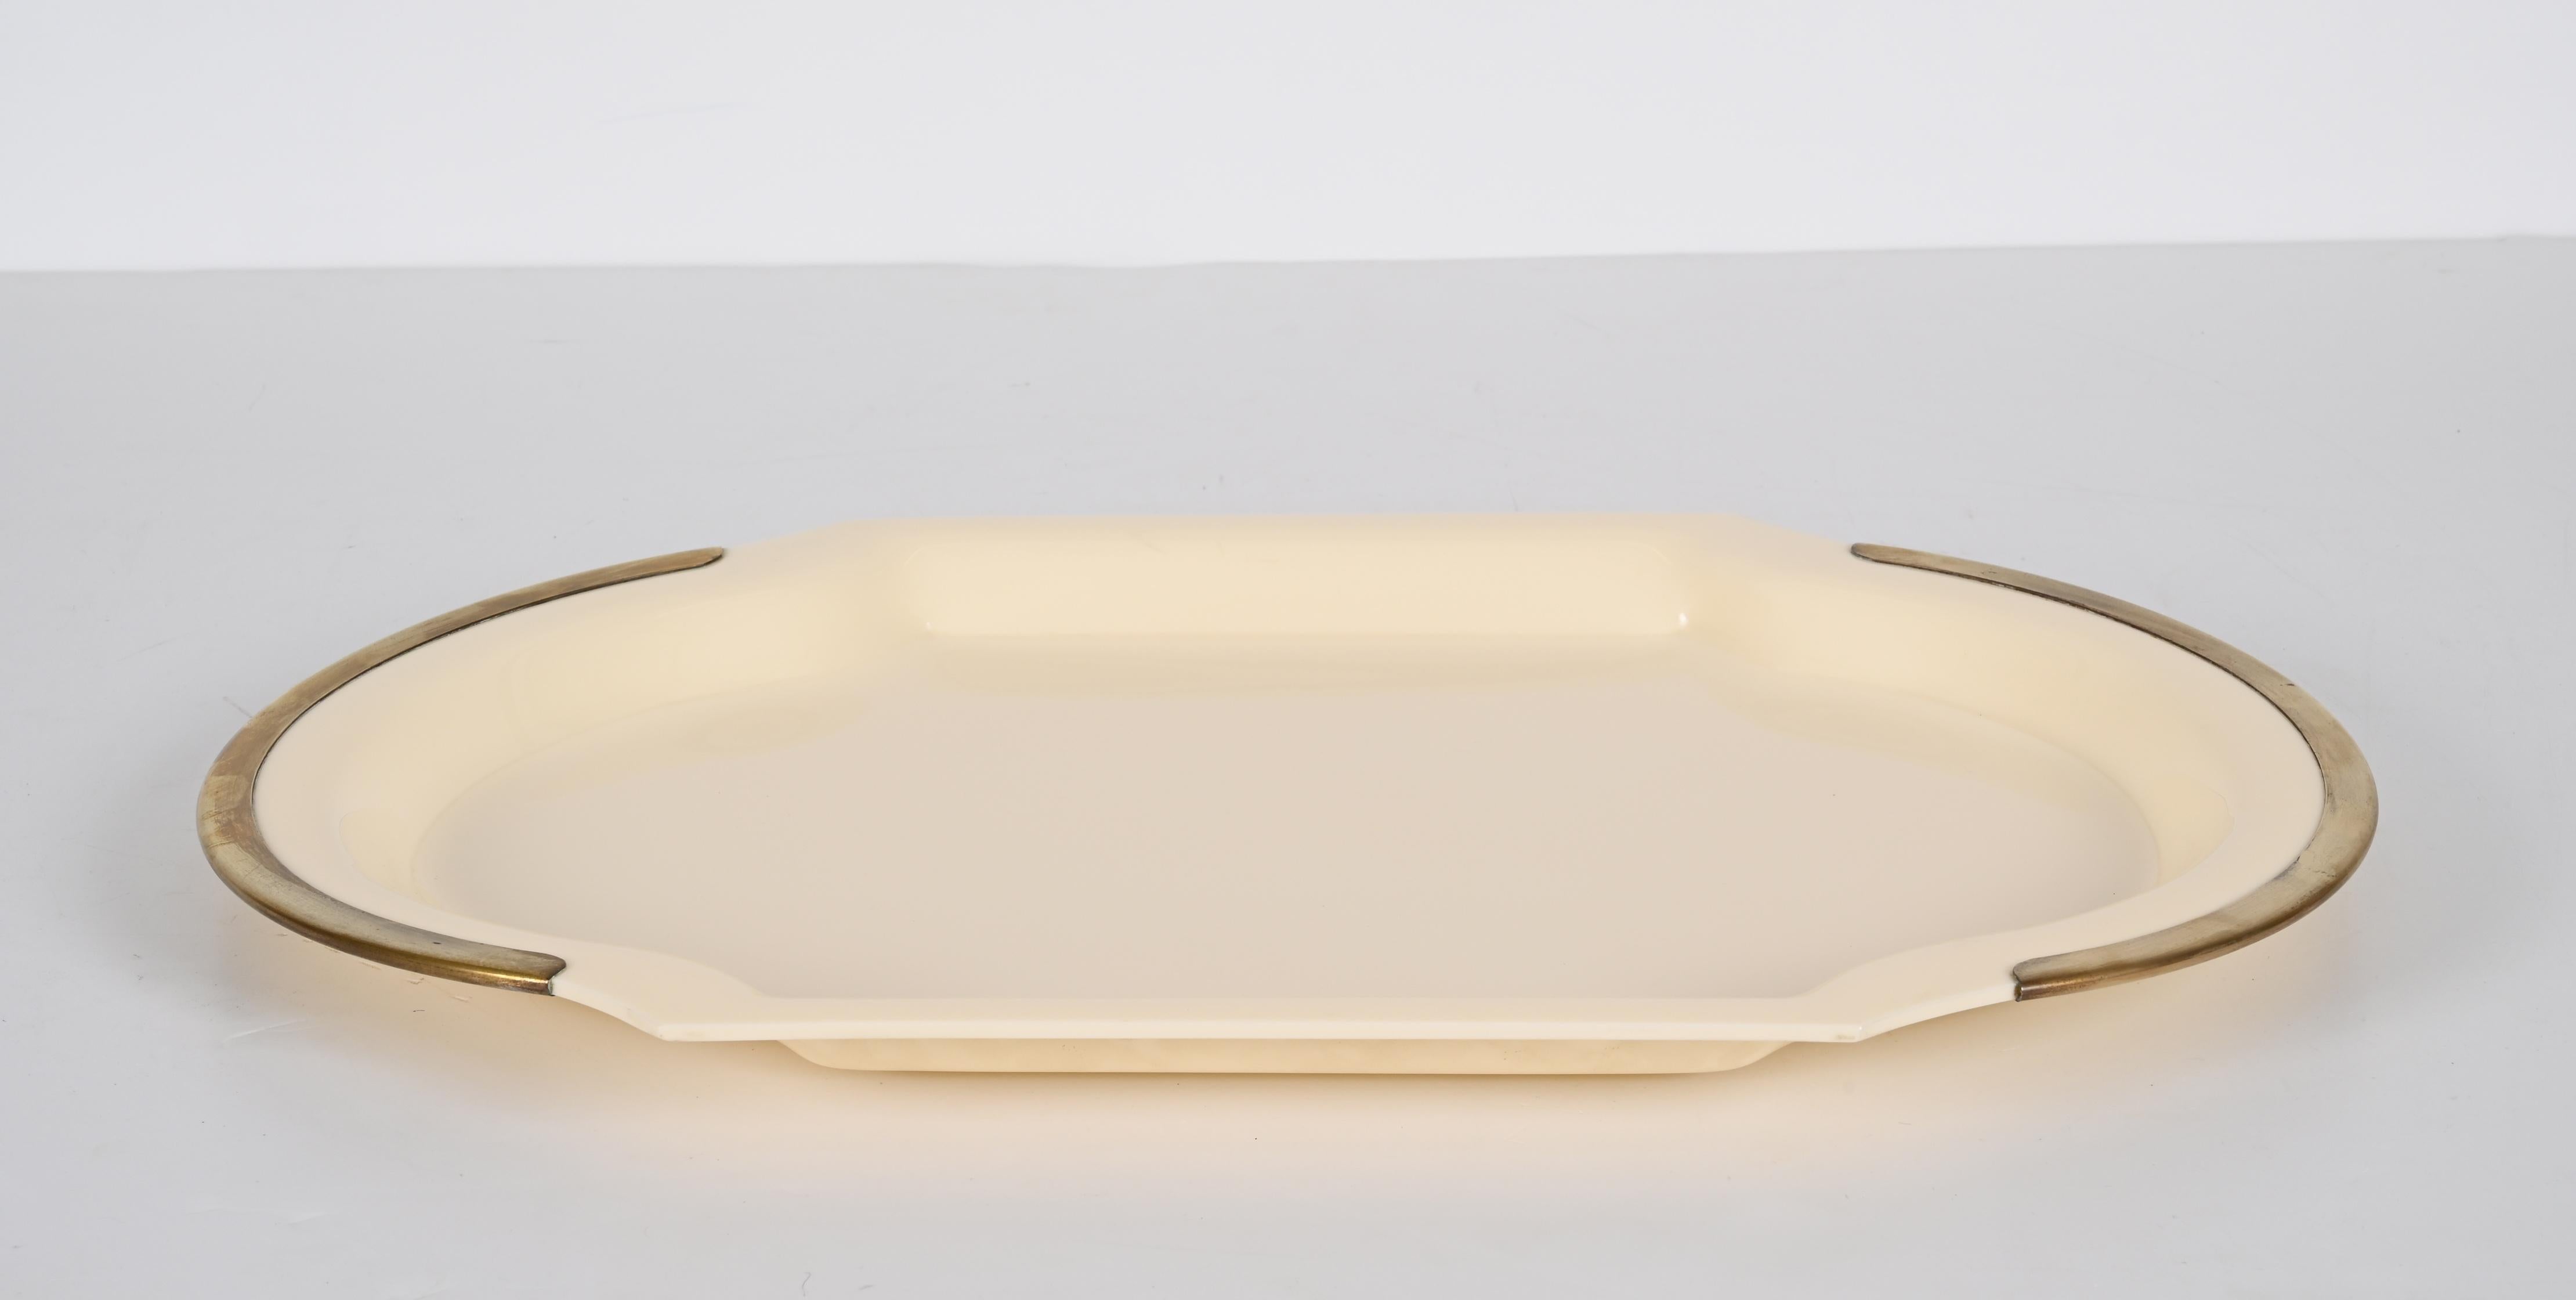 20th Century Mid-Century Oval Serving Tray in Brass and Cream-Colored Plexiglass, Italy 1980s For Sale